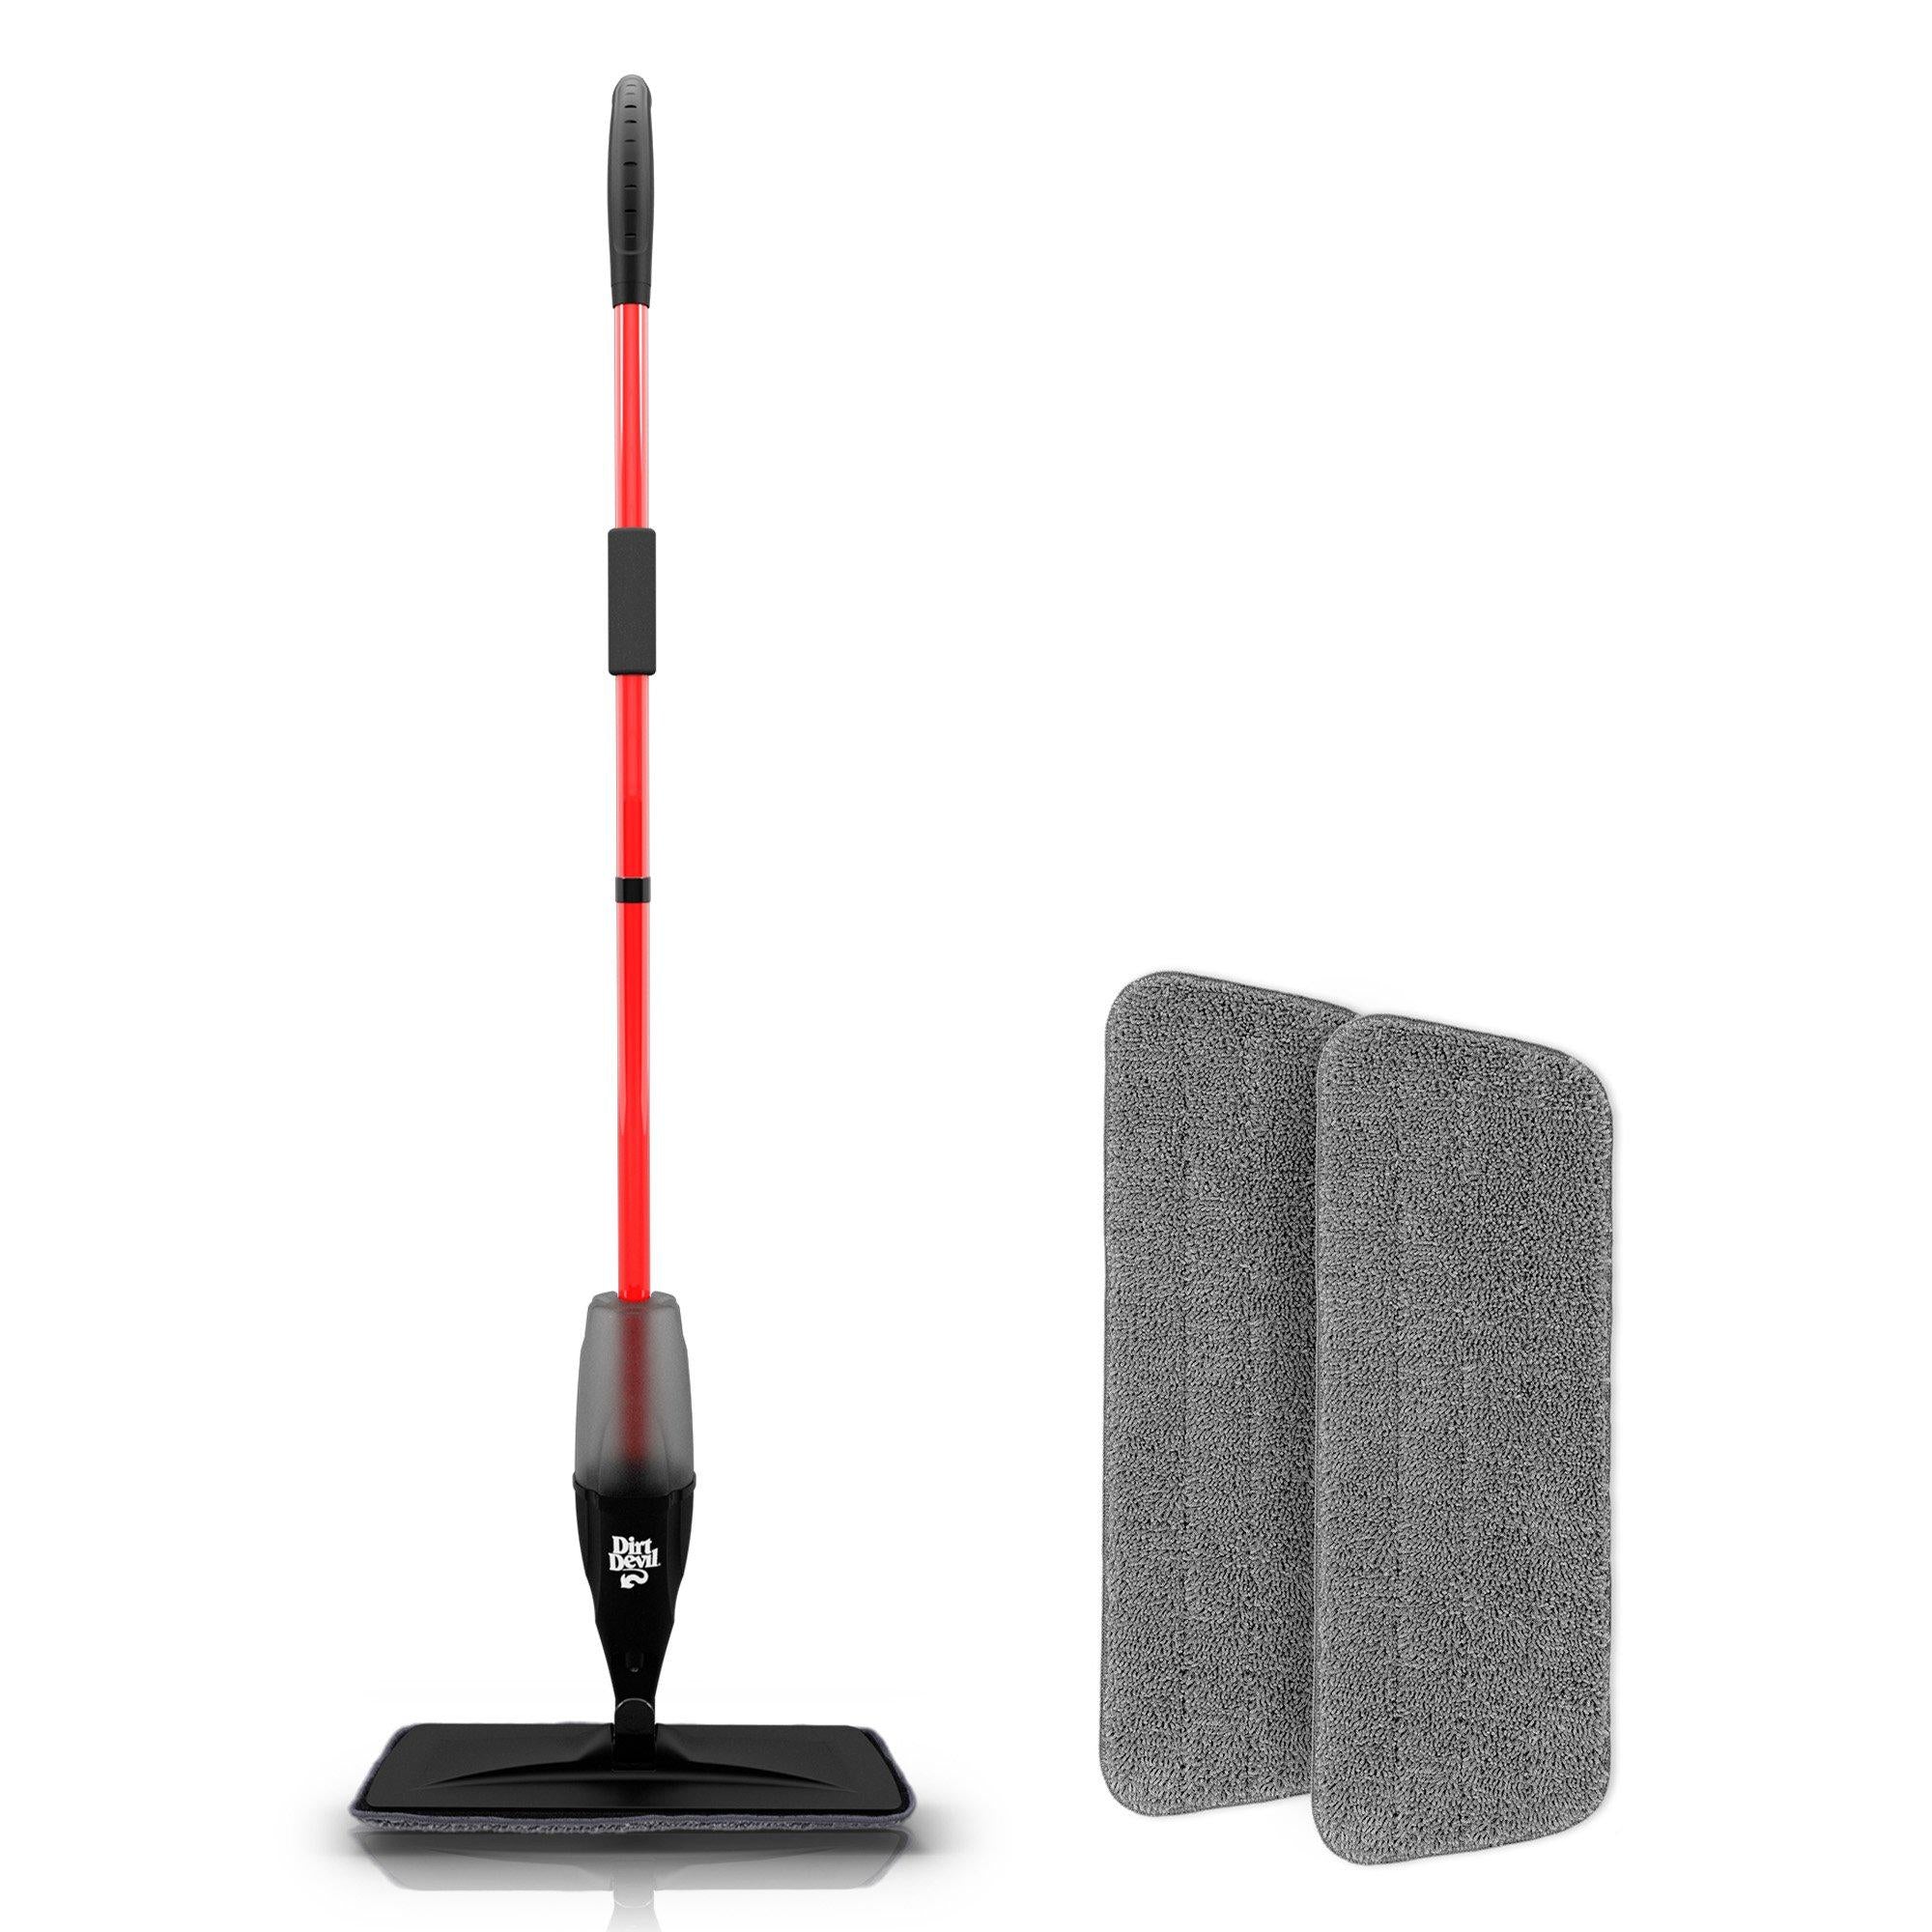 Spray Mop, Dry Floors In Seconds, Machine Washable Pads